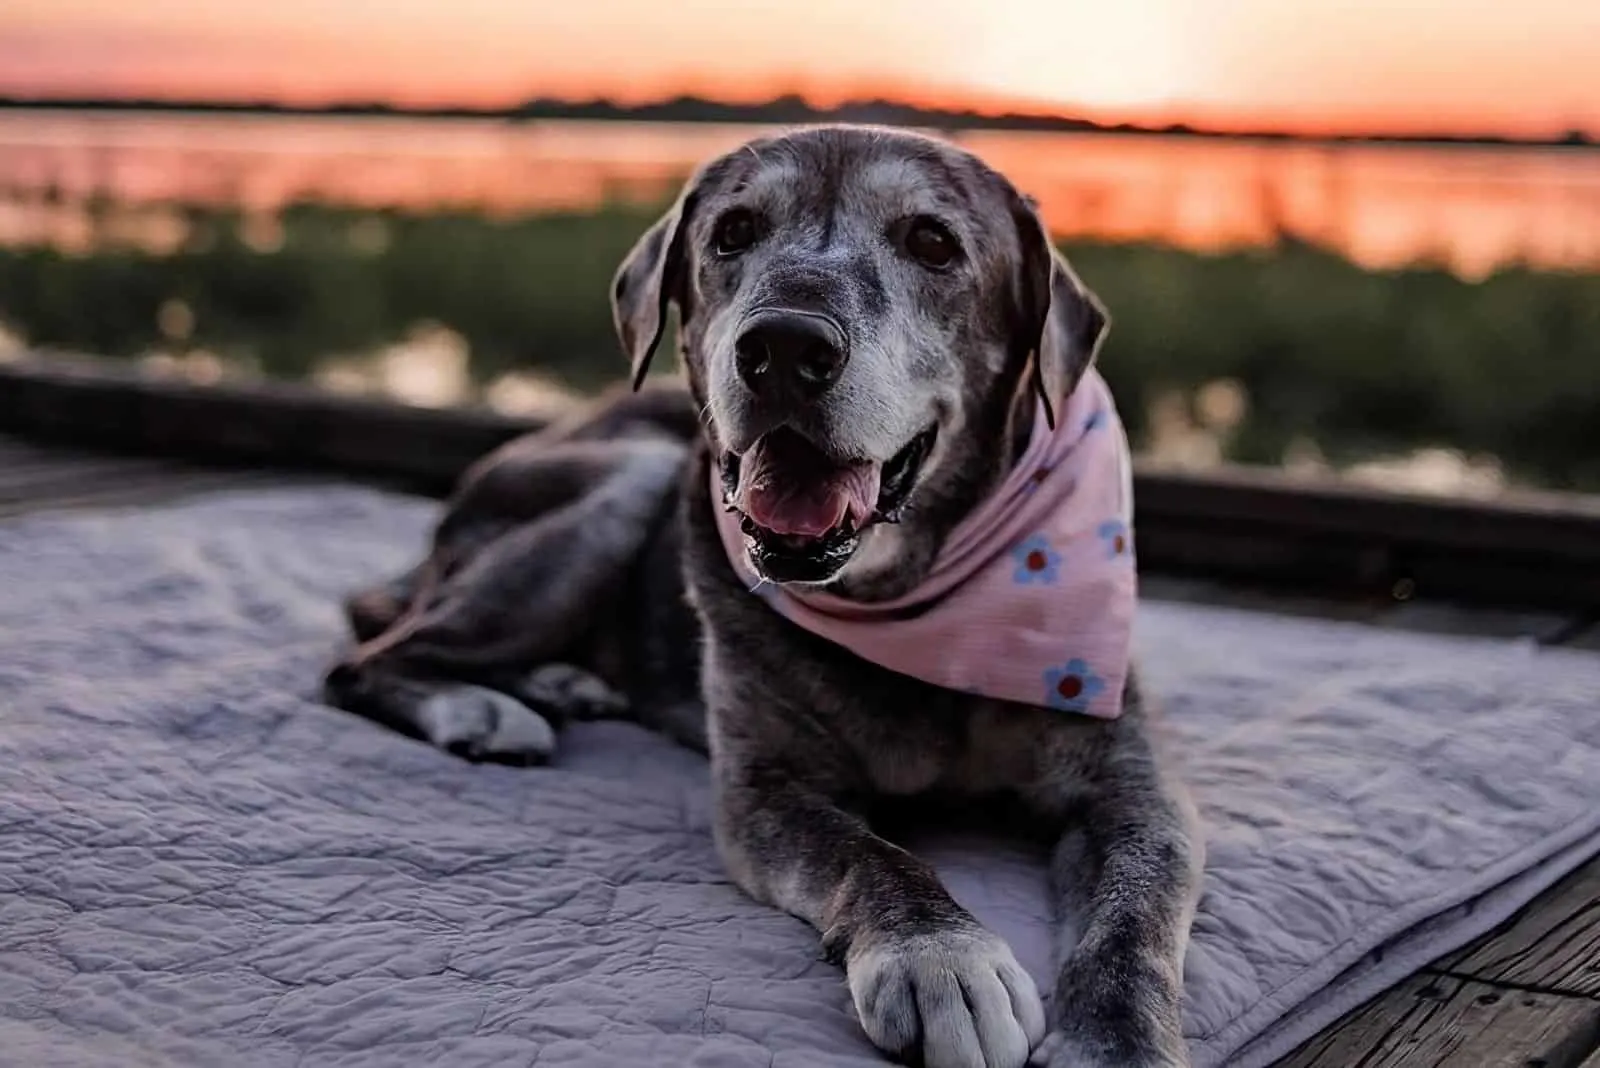 old dog lying on the blanket outdoors